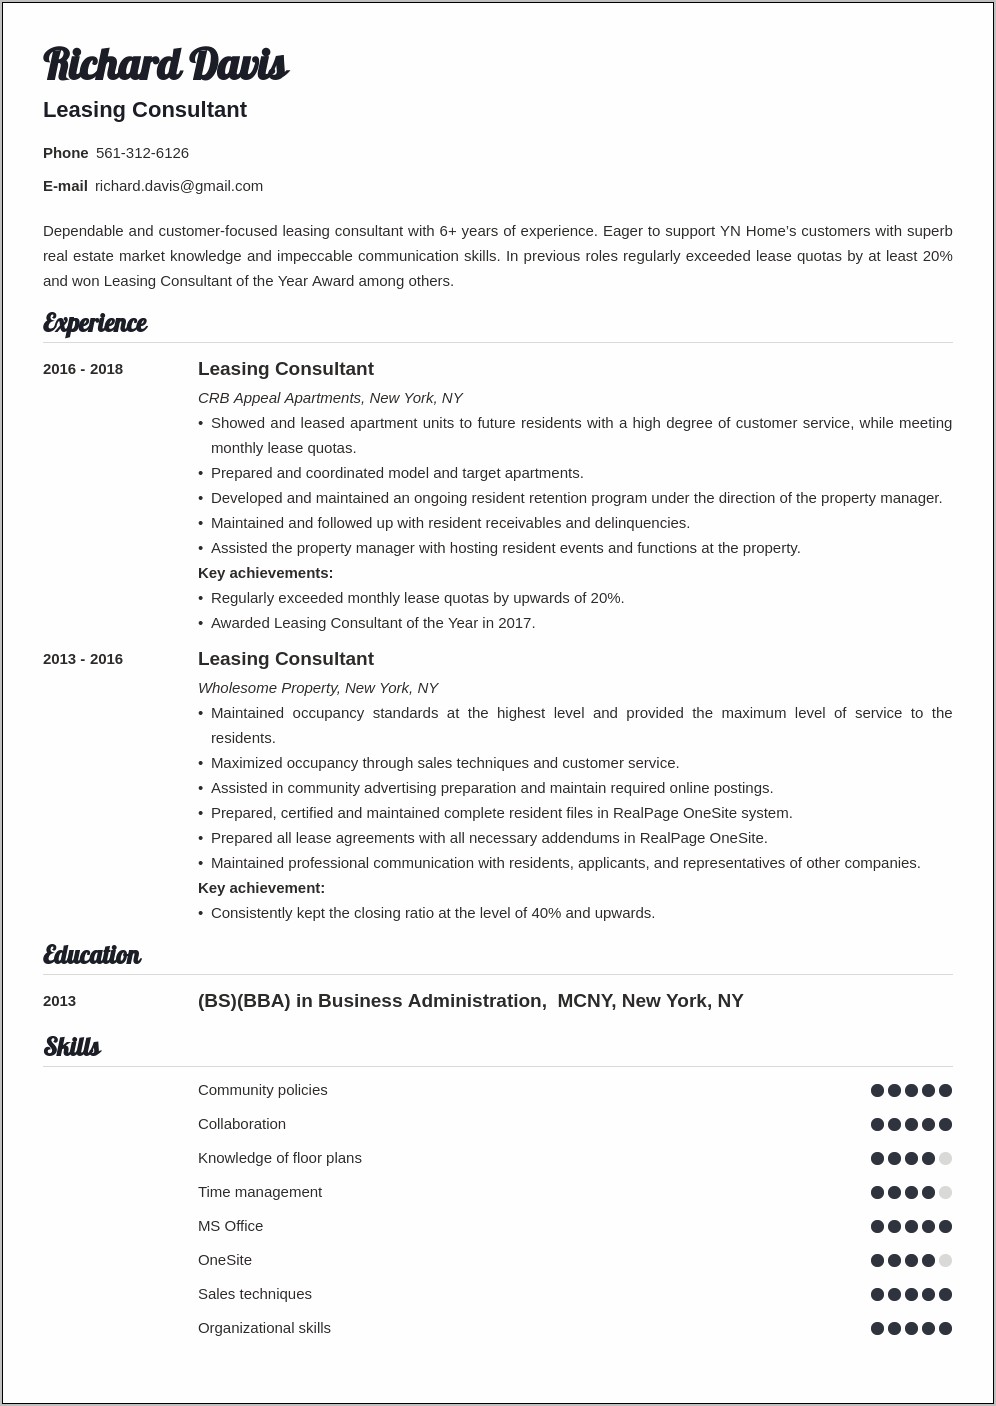 Marketing Consultant Resume Cover Letter Examples